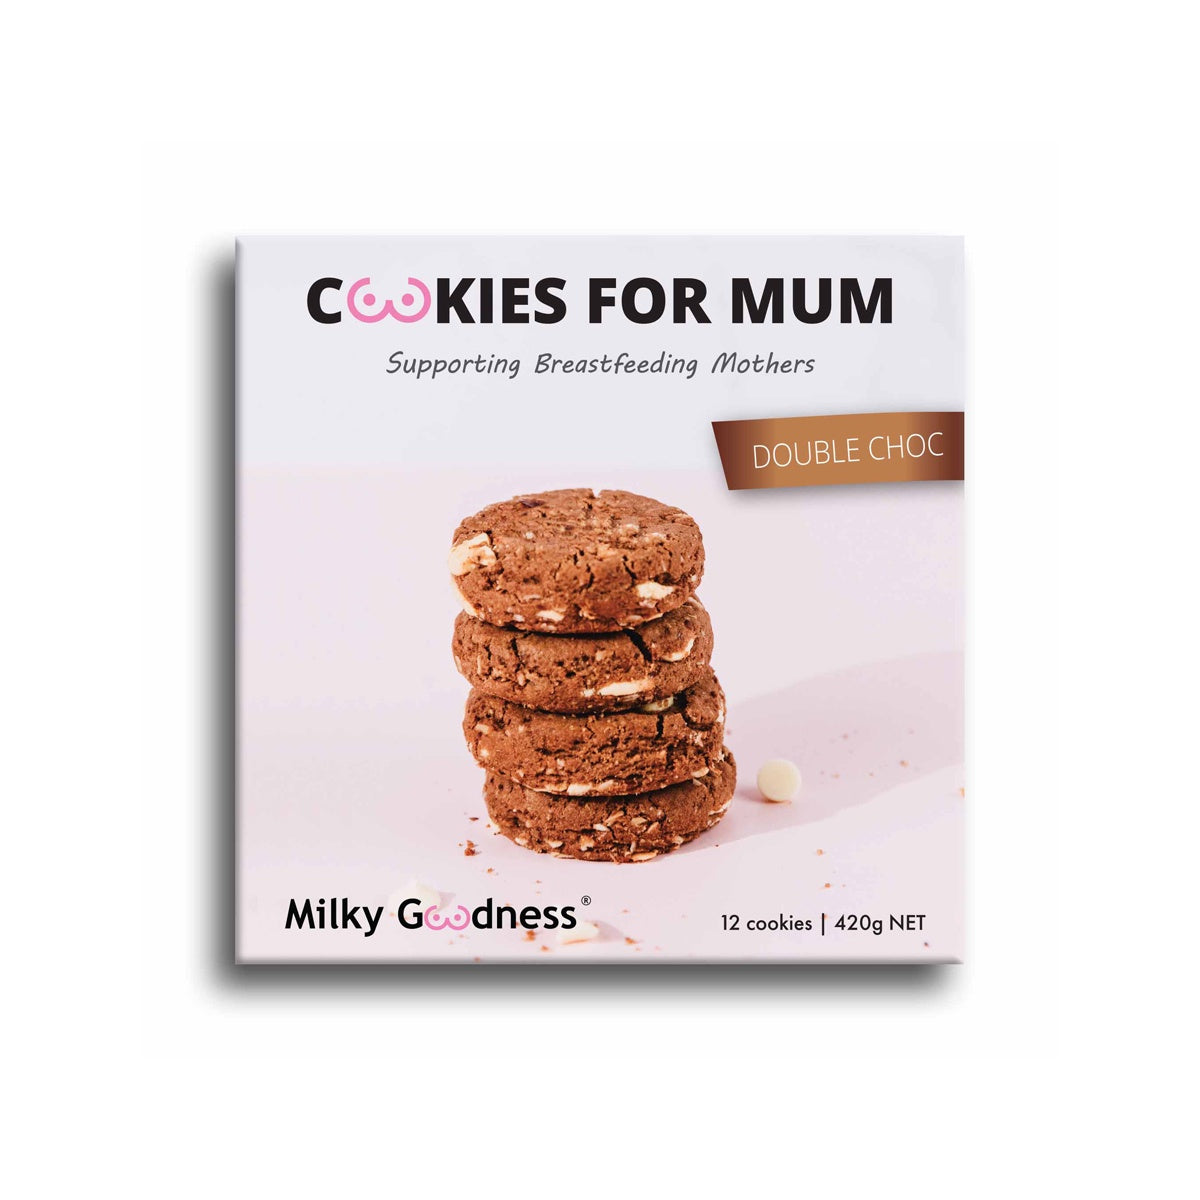 Milky Goodness - Double Choc Lactation Cookies